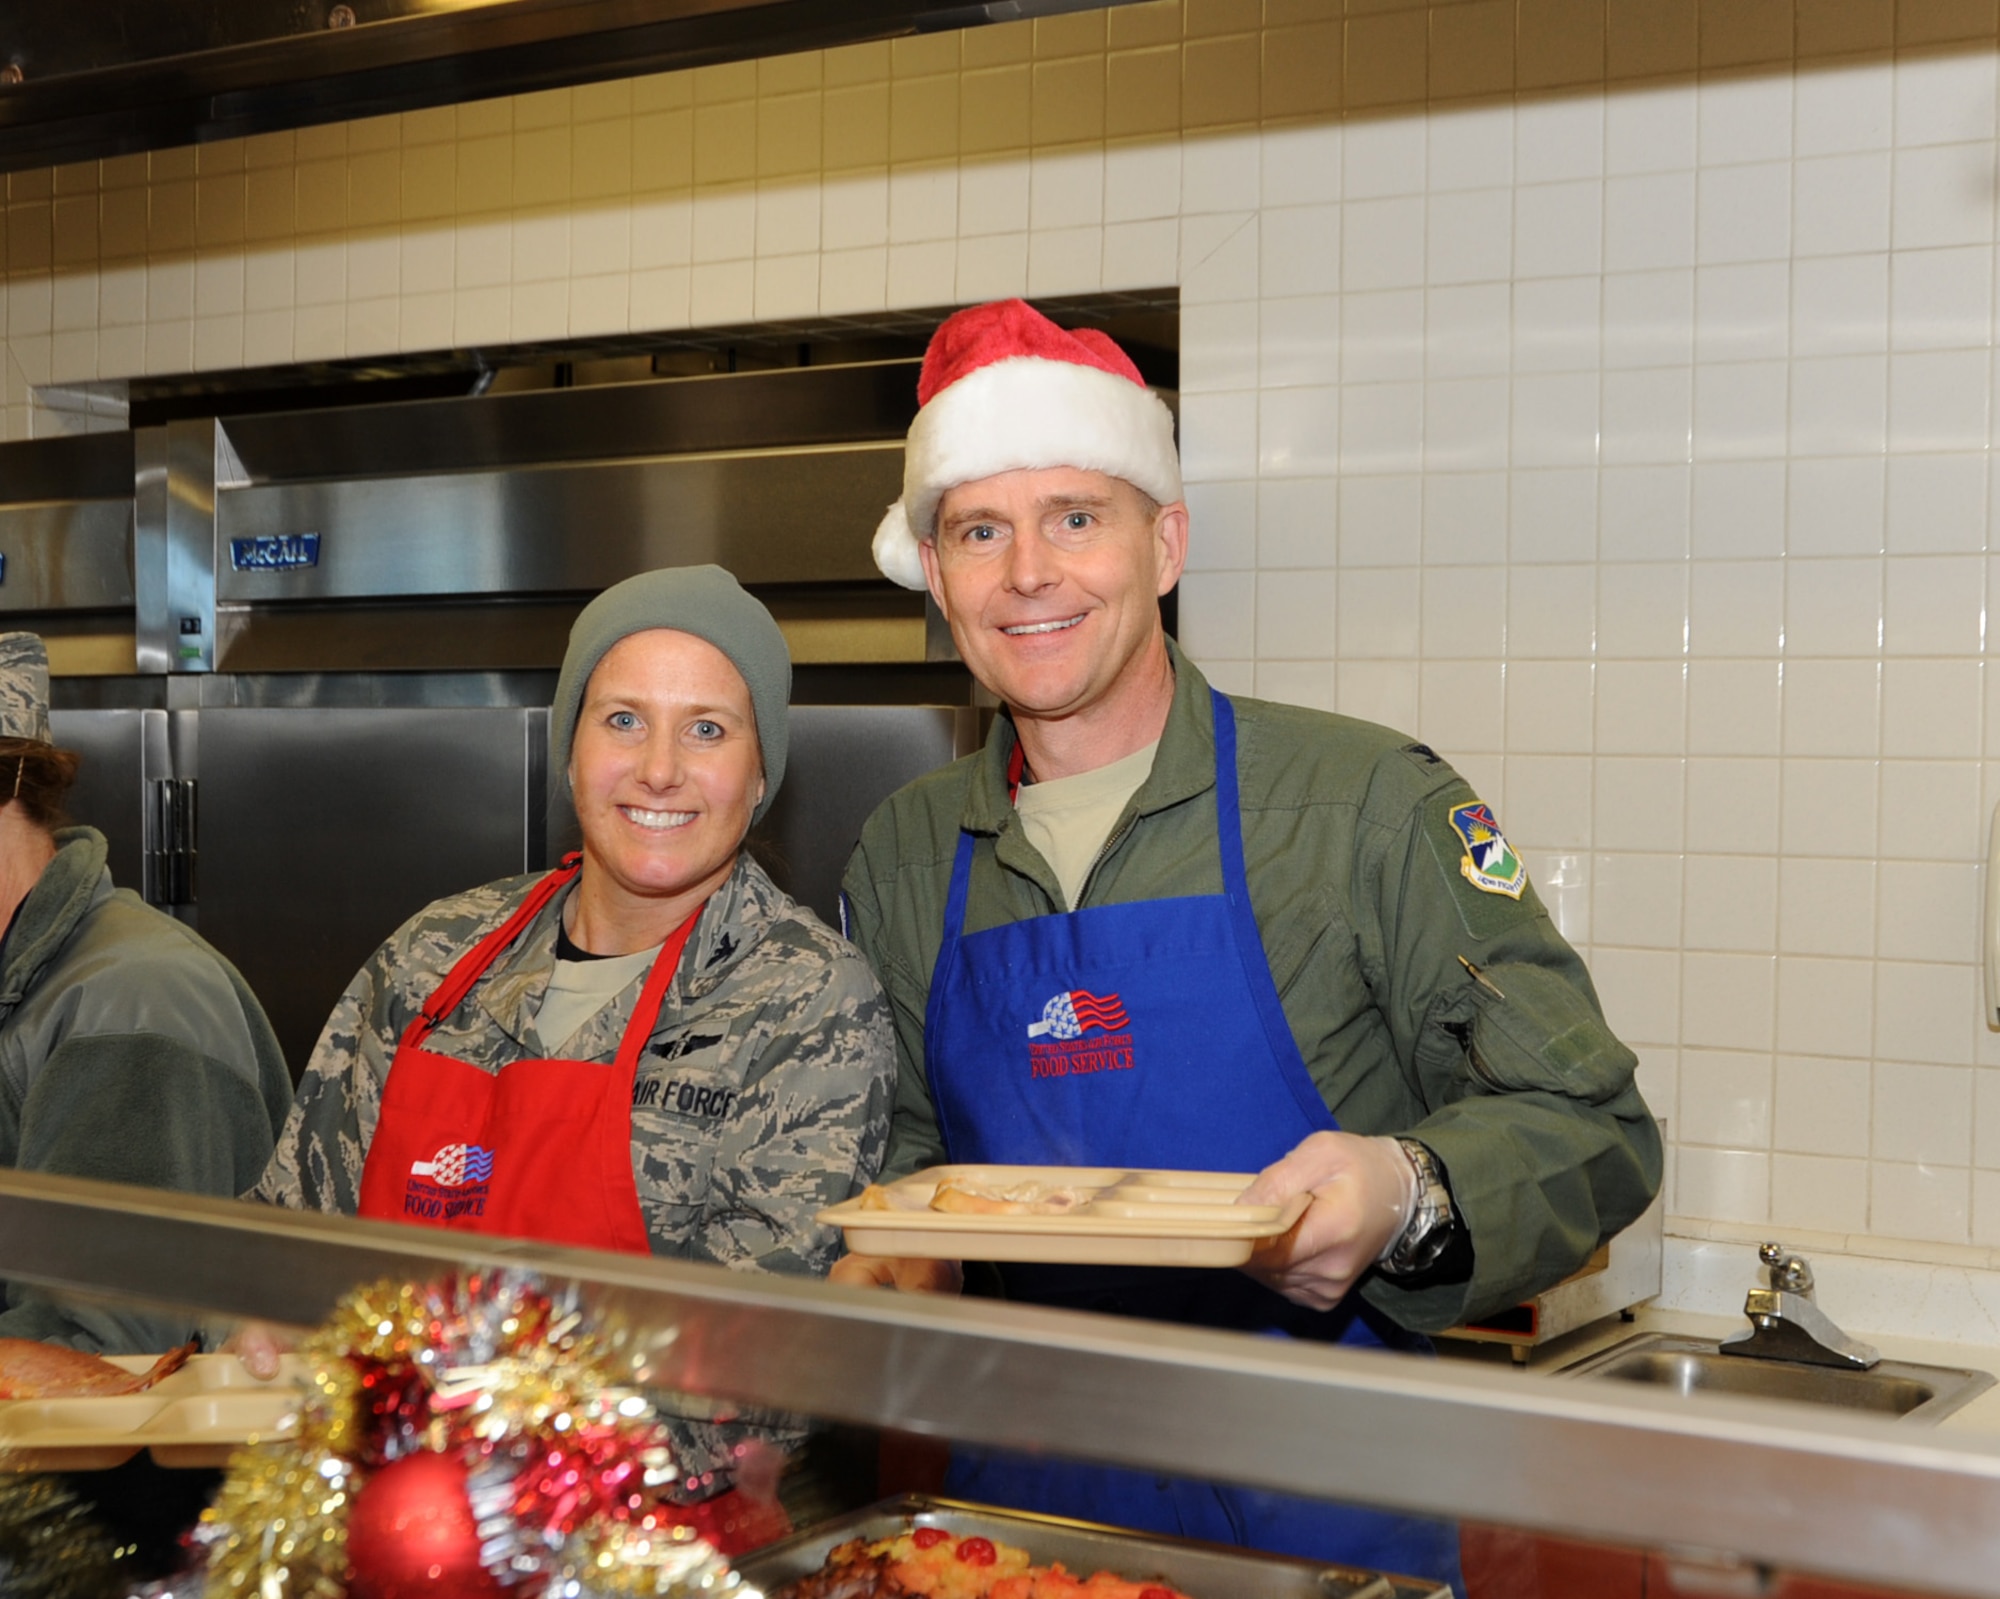 Col. Richard Wedan, 142nd Fighter Wing Commander and Col. Heidi Kjos, 142nd Fighter Wing Medical Group Commander serve holiday lunch to members of the wing, Dec. 07, 2013 at the Portland Air National Guard Base, Ore. (U.S. Air National Guard photo by Master Sgt. Shelly Davison/Released)